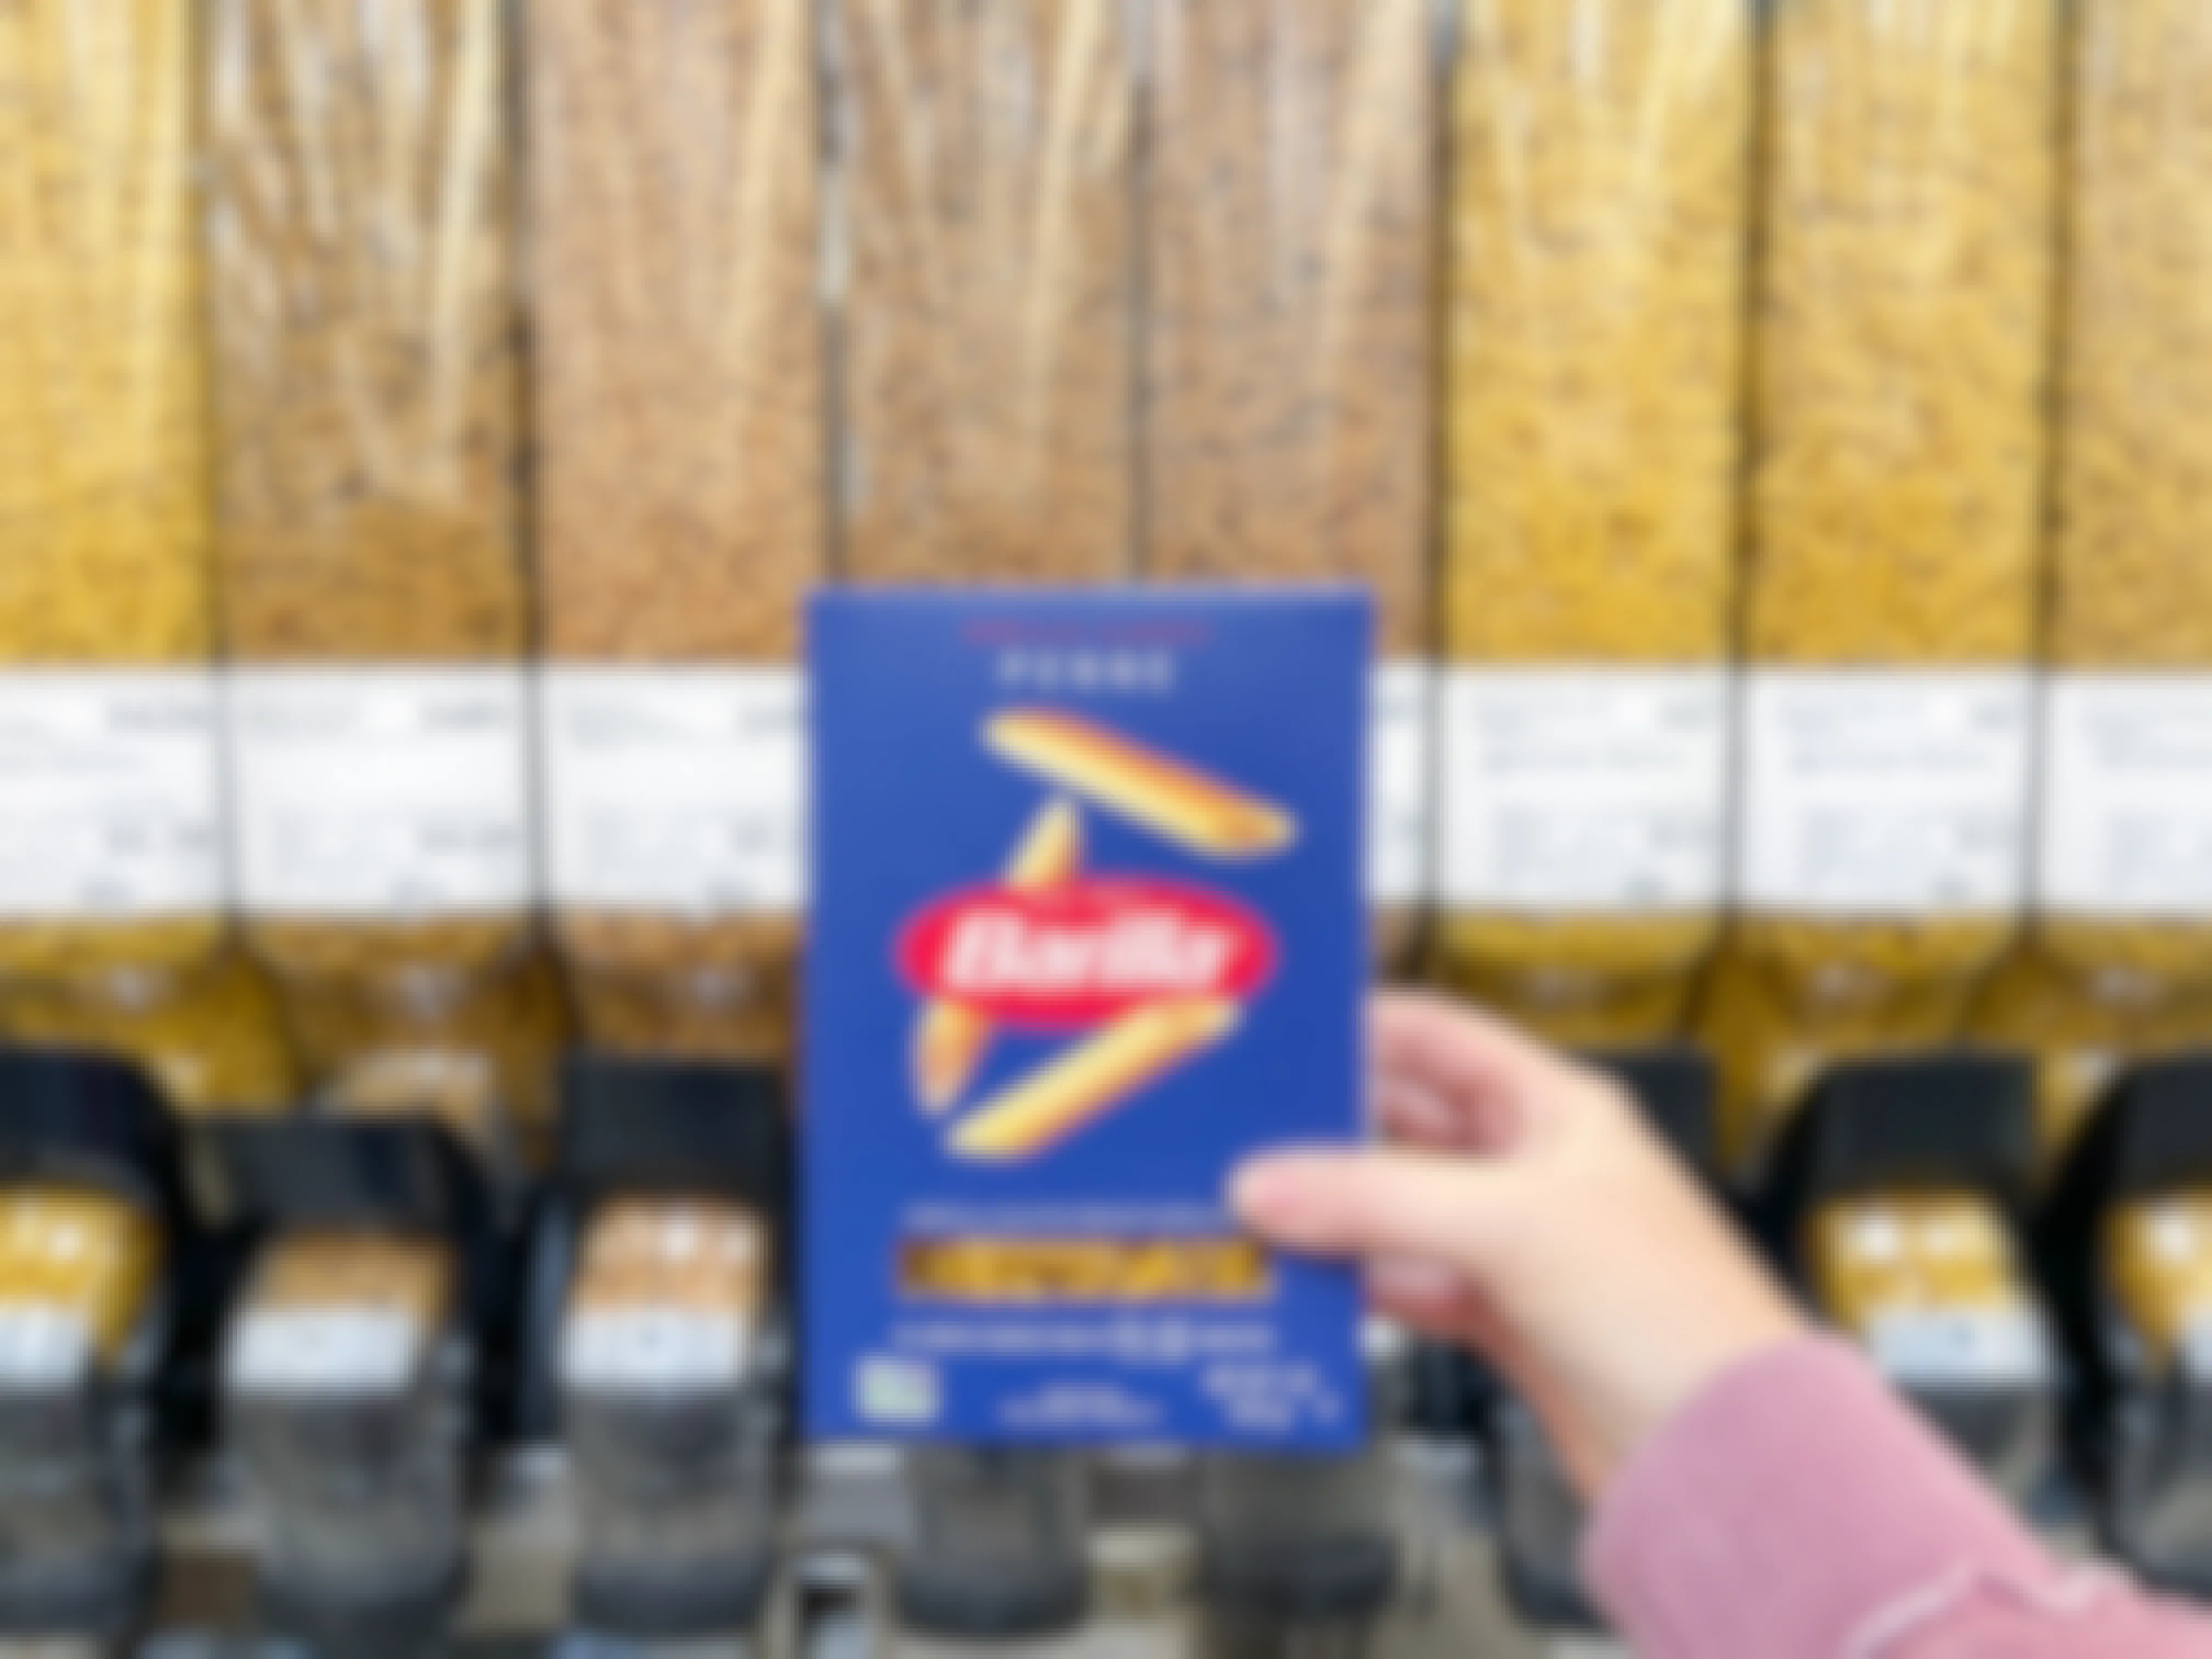 a package of pasta being held in front of winco bulk foods